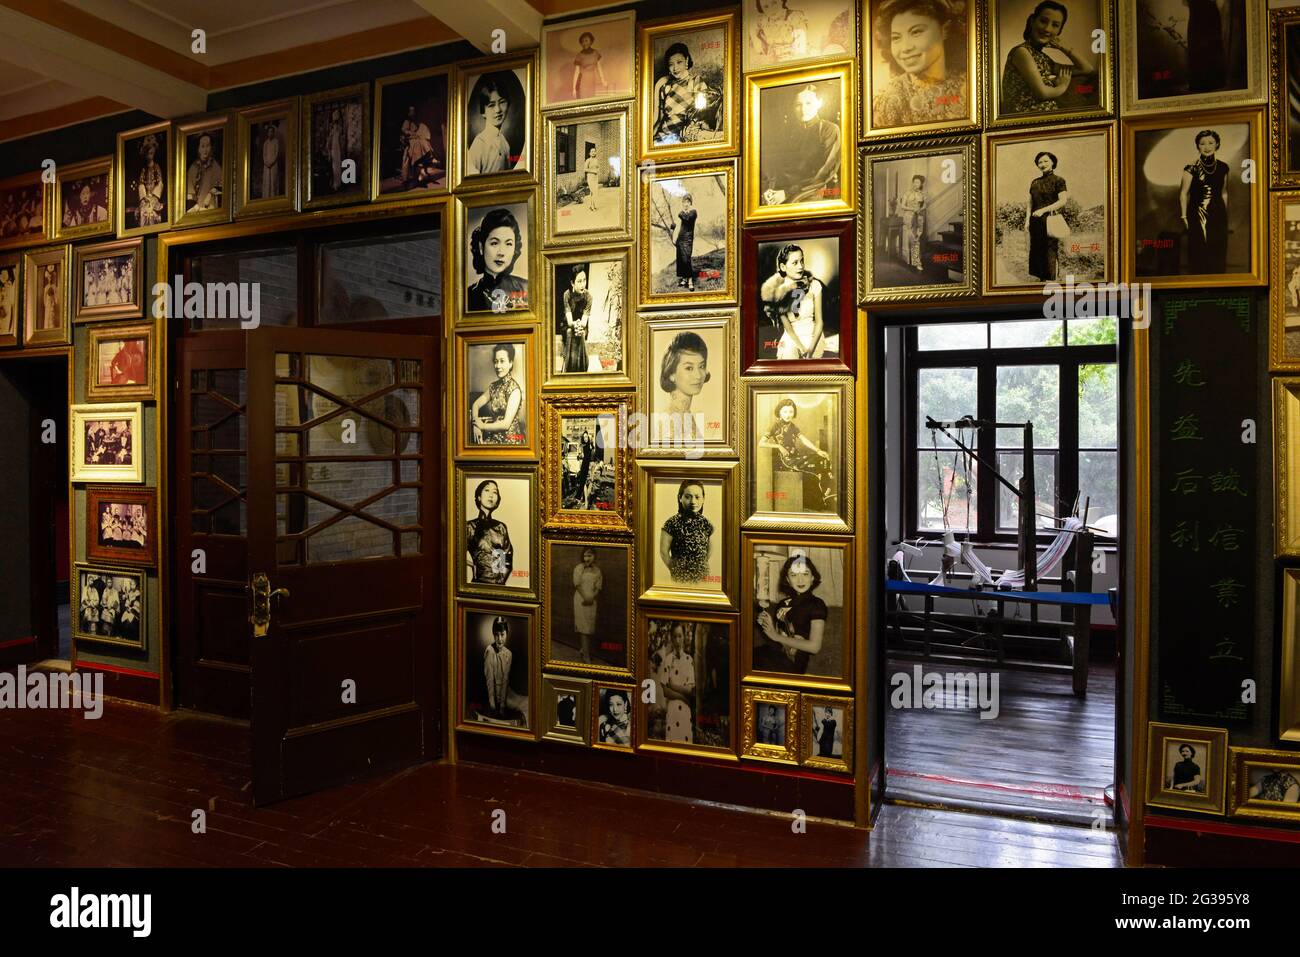 Photos of famous Chinese women in years past all wearing the Qipao dress line the walls at the Qipao museum in an old house in Yantai, China Stock Photo